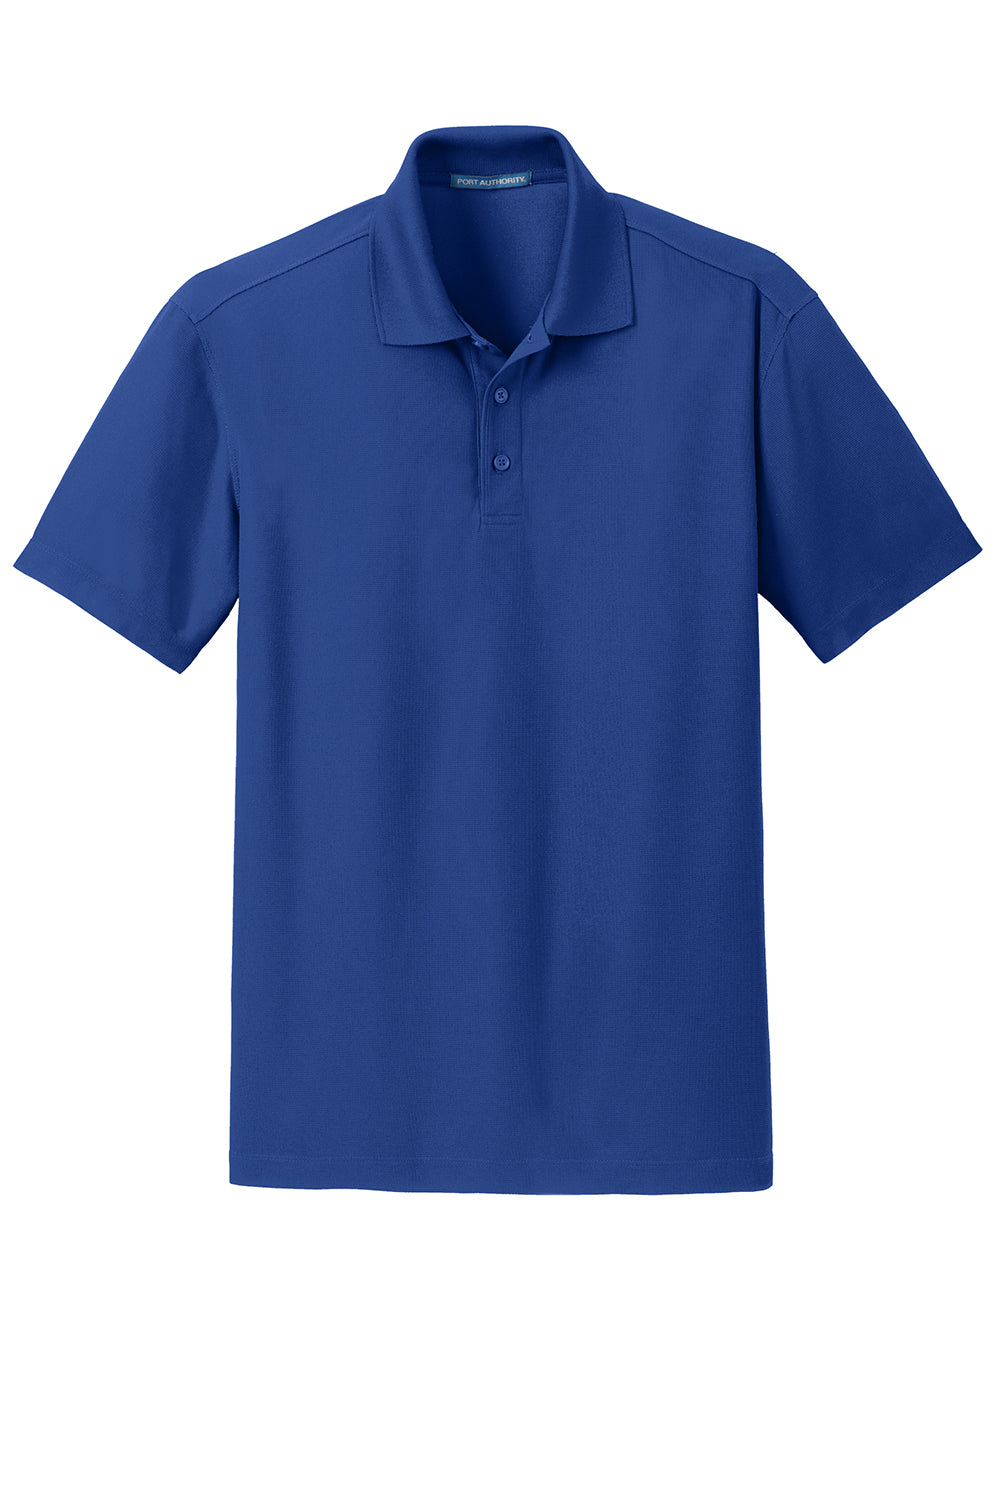 Port Authority K572 Mens Dry Zone Moisture Wicking Short Sleeve Polo Shirt Royal Blue Flat Front